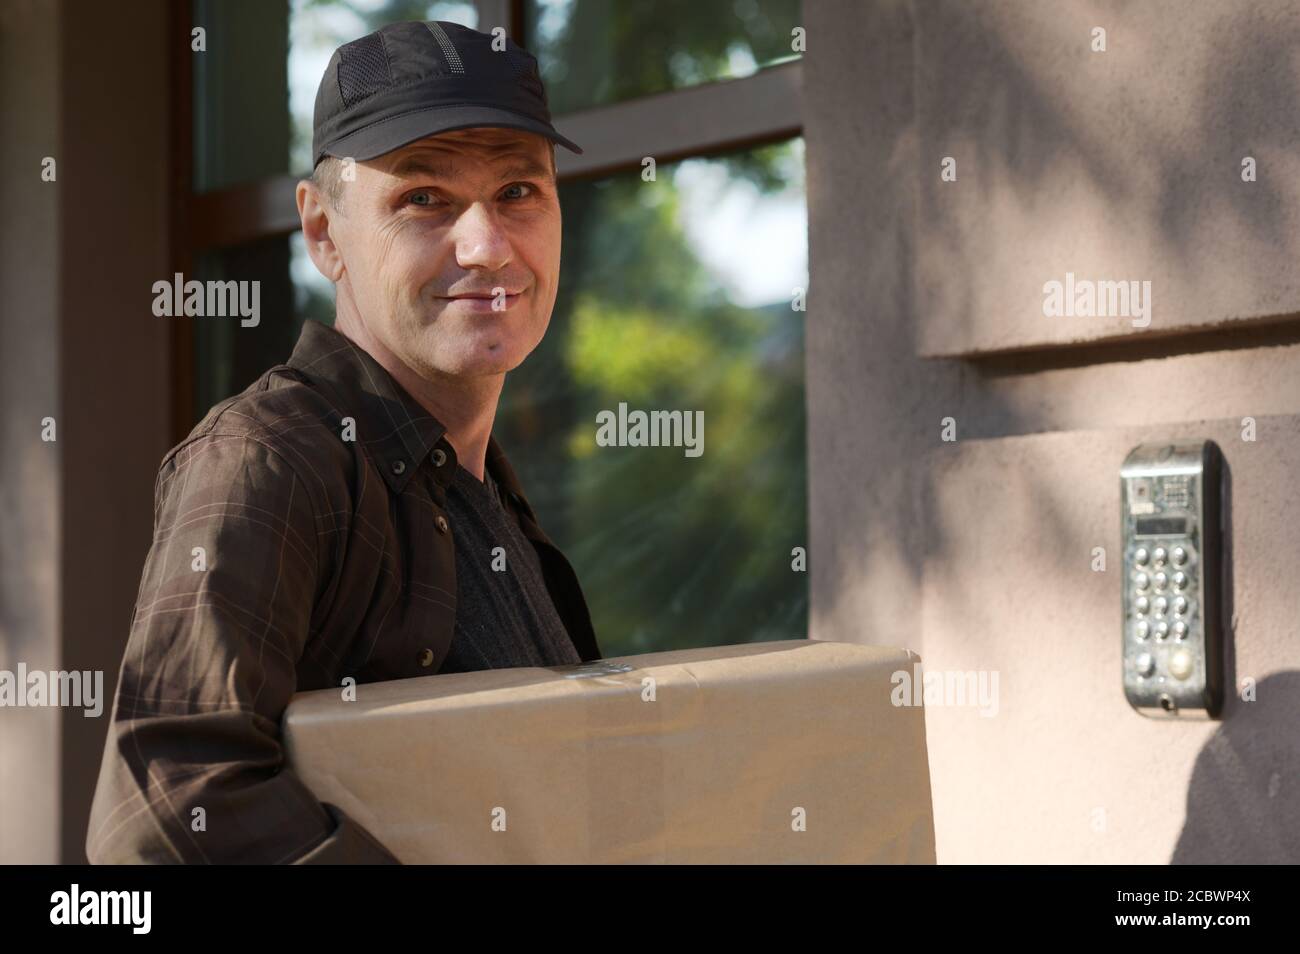 Delivery man with a box outdoors Stock Photo